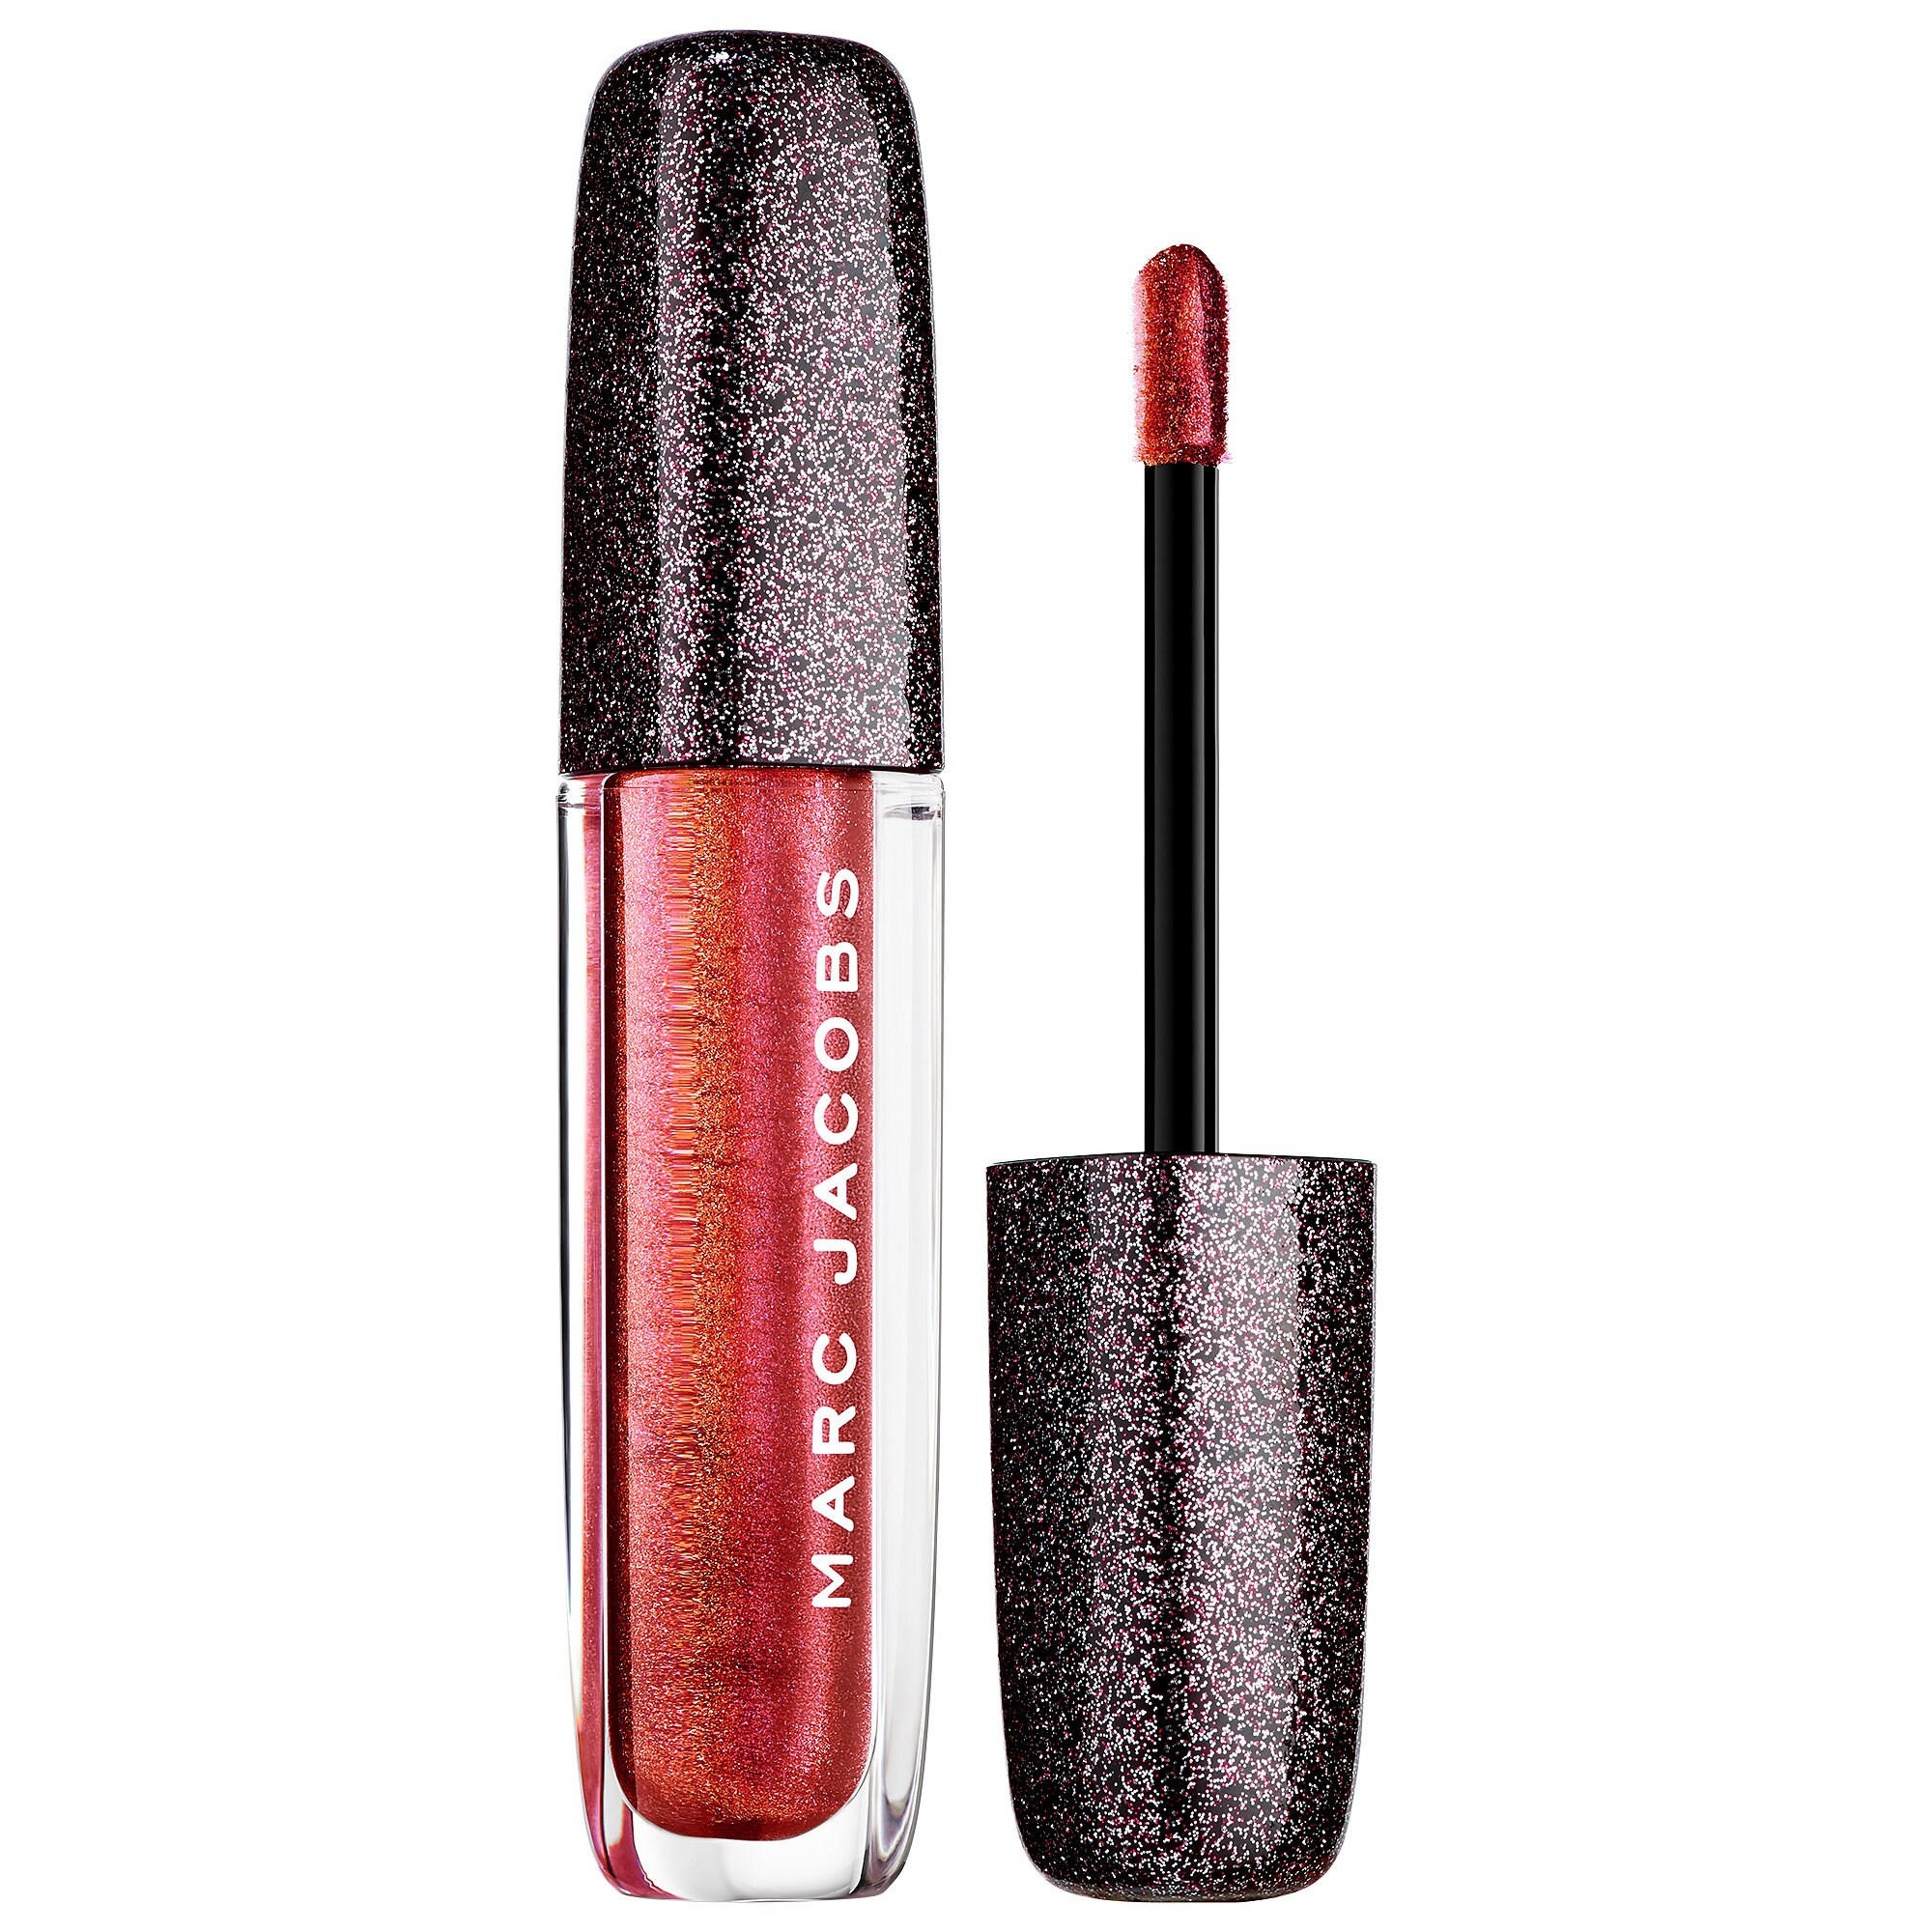 Marc Jacobs Enamored Dazzling Lip Lacquer Atomic 